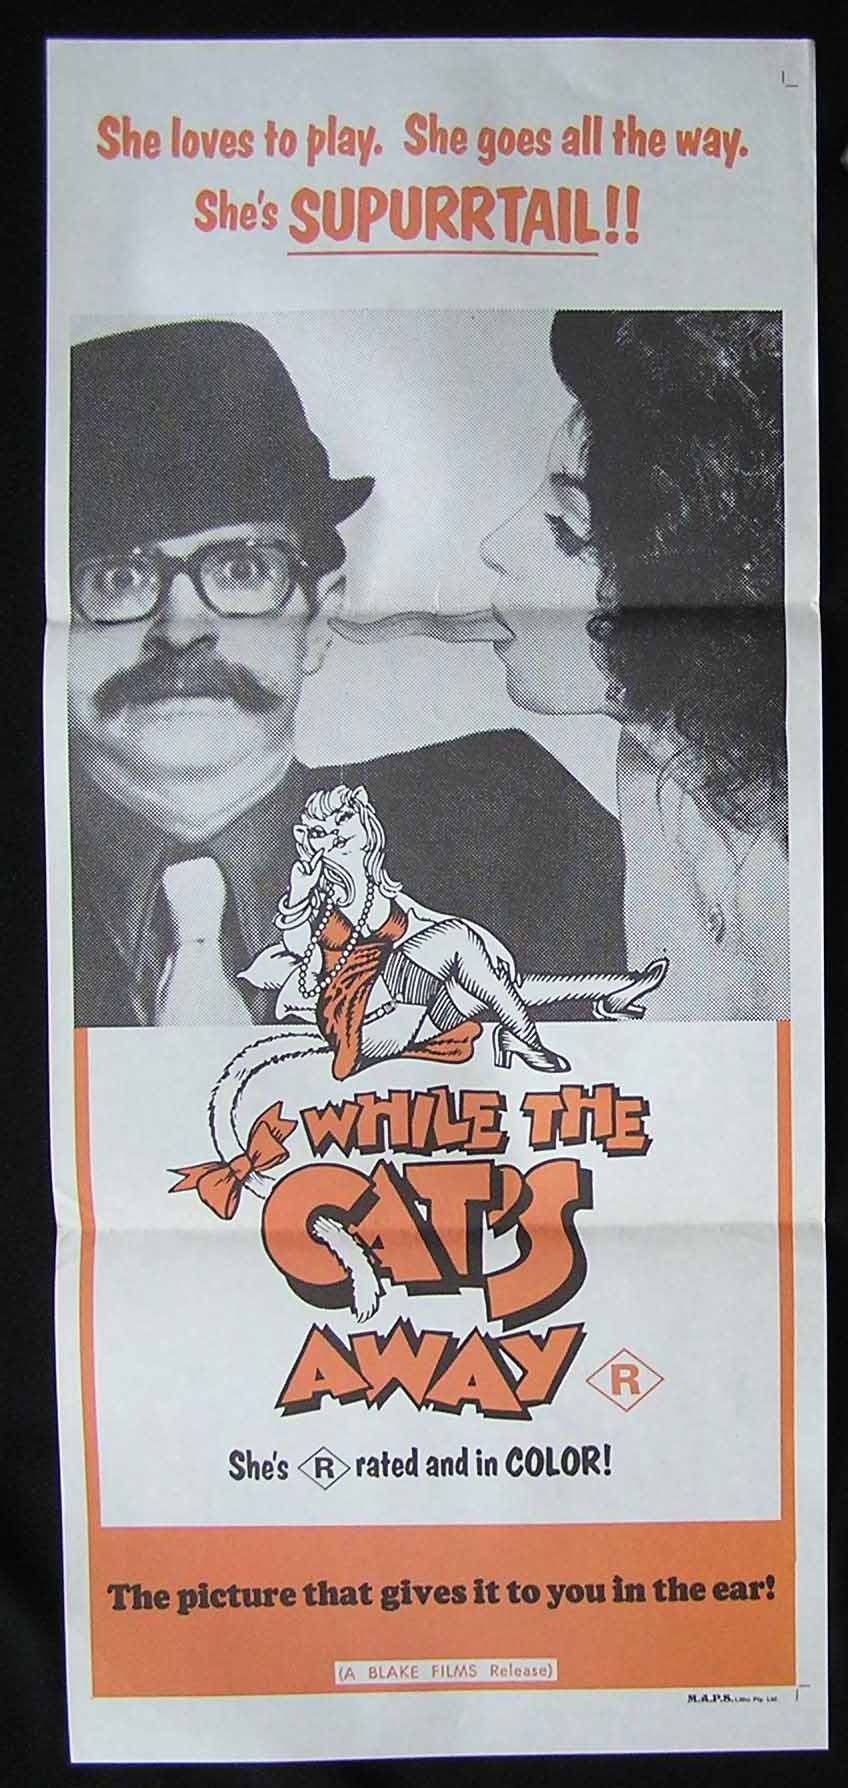 WHILE THE CATS AWAY Original daybill Movie poster Sexploitation Blake Films